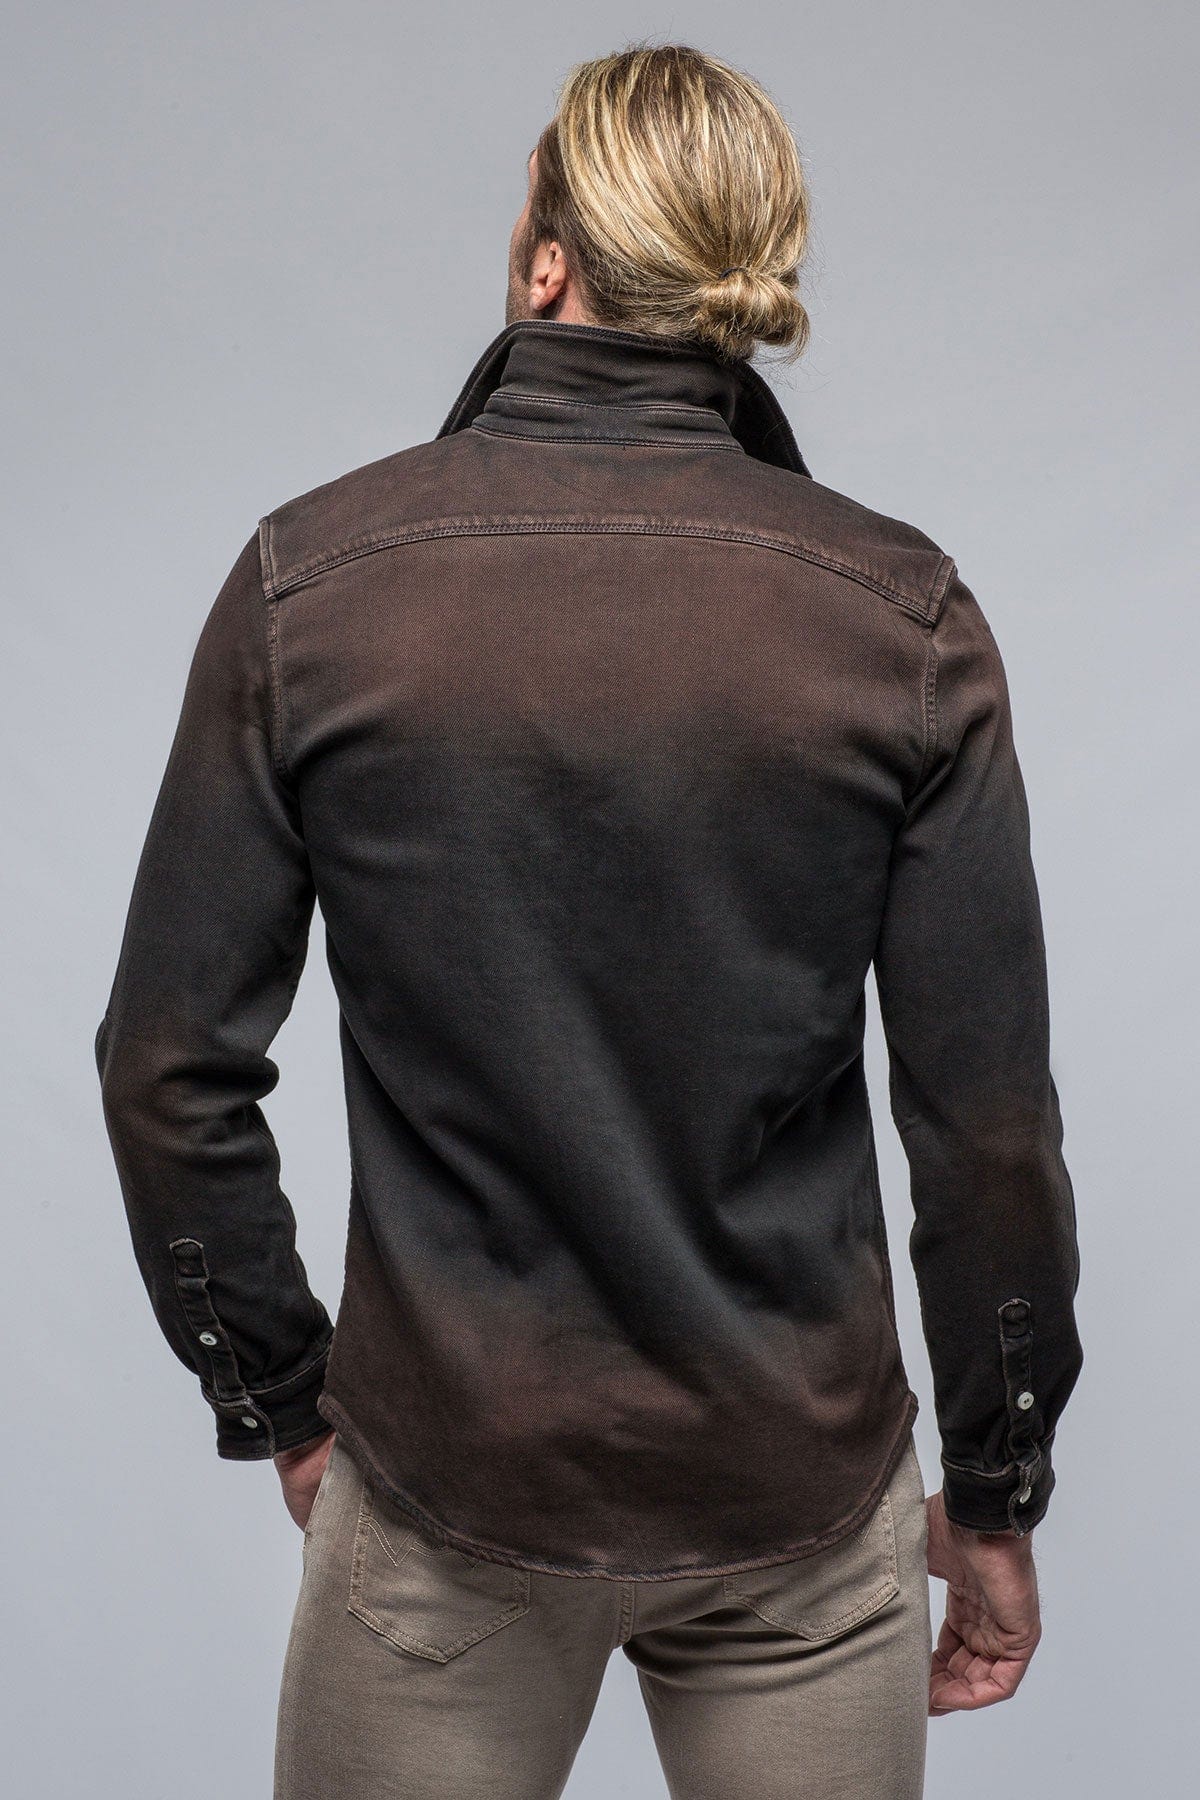 Roper Western Snap Shirt In Wenge - AXEL'S